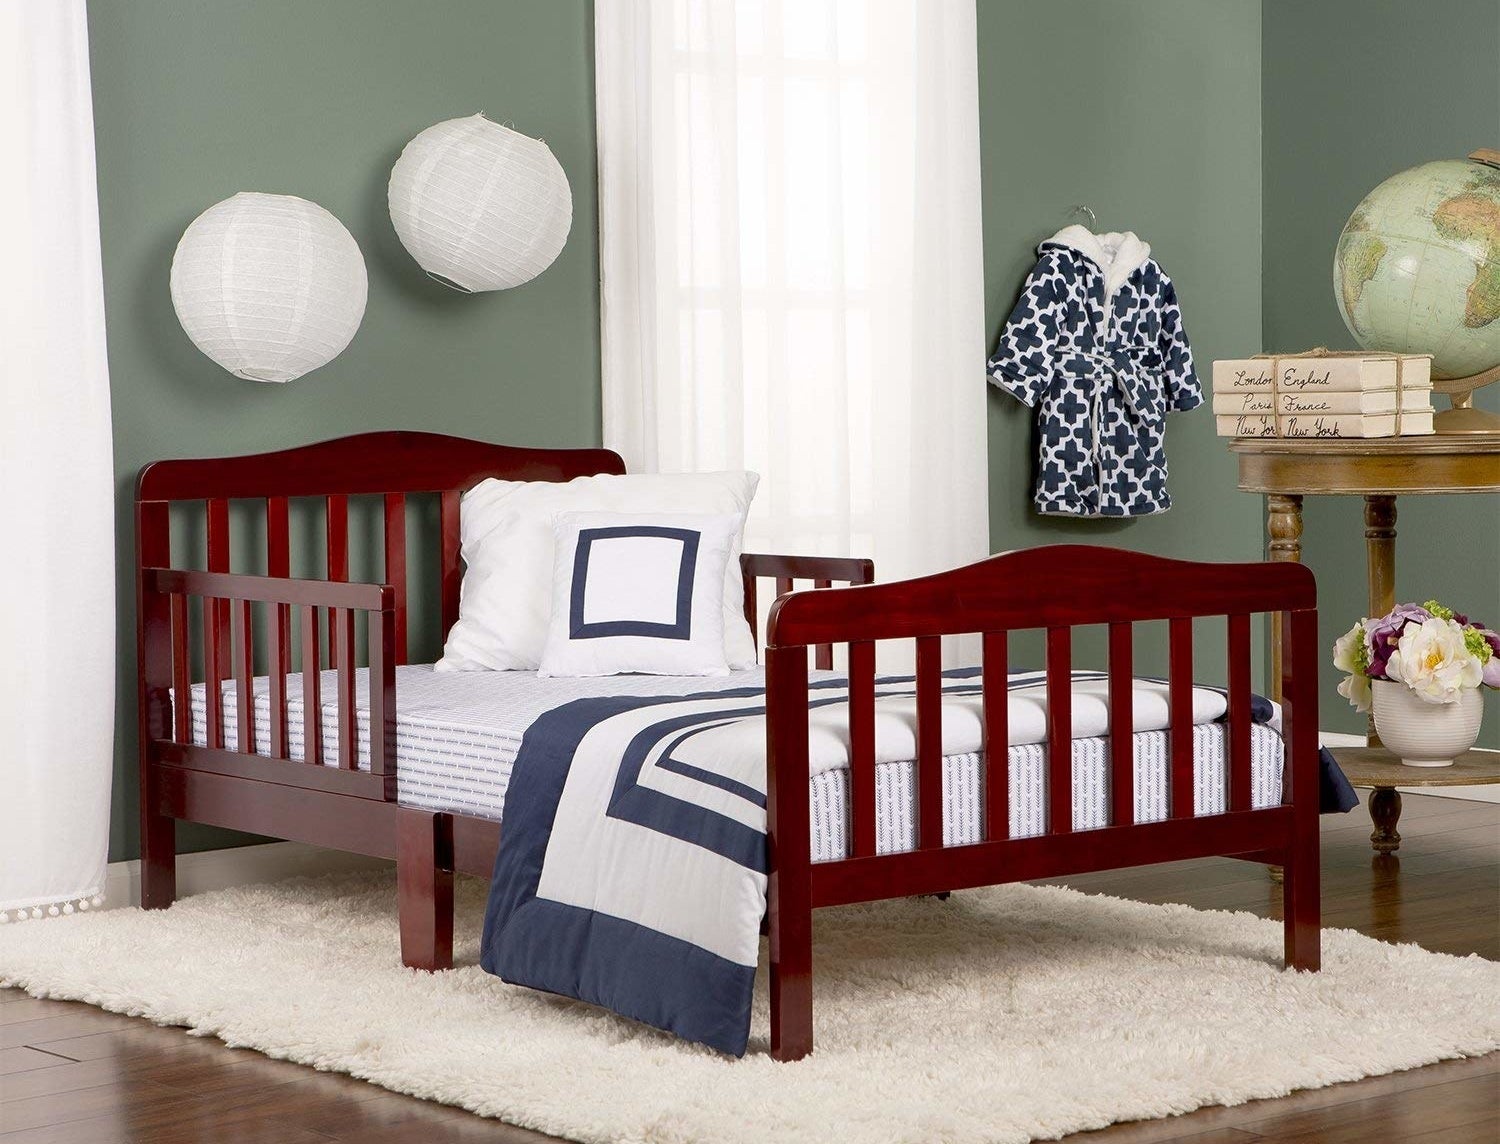 The bed in brown with a head and footboard and rails on either side